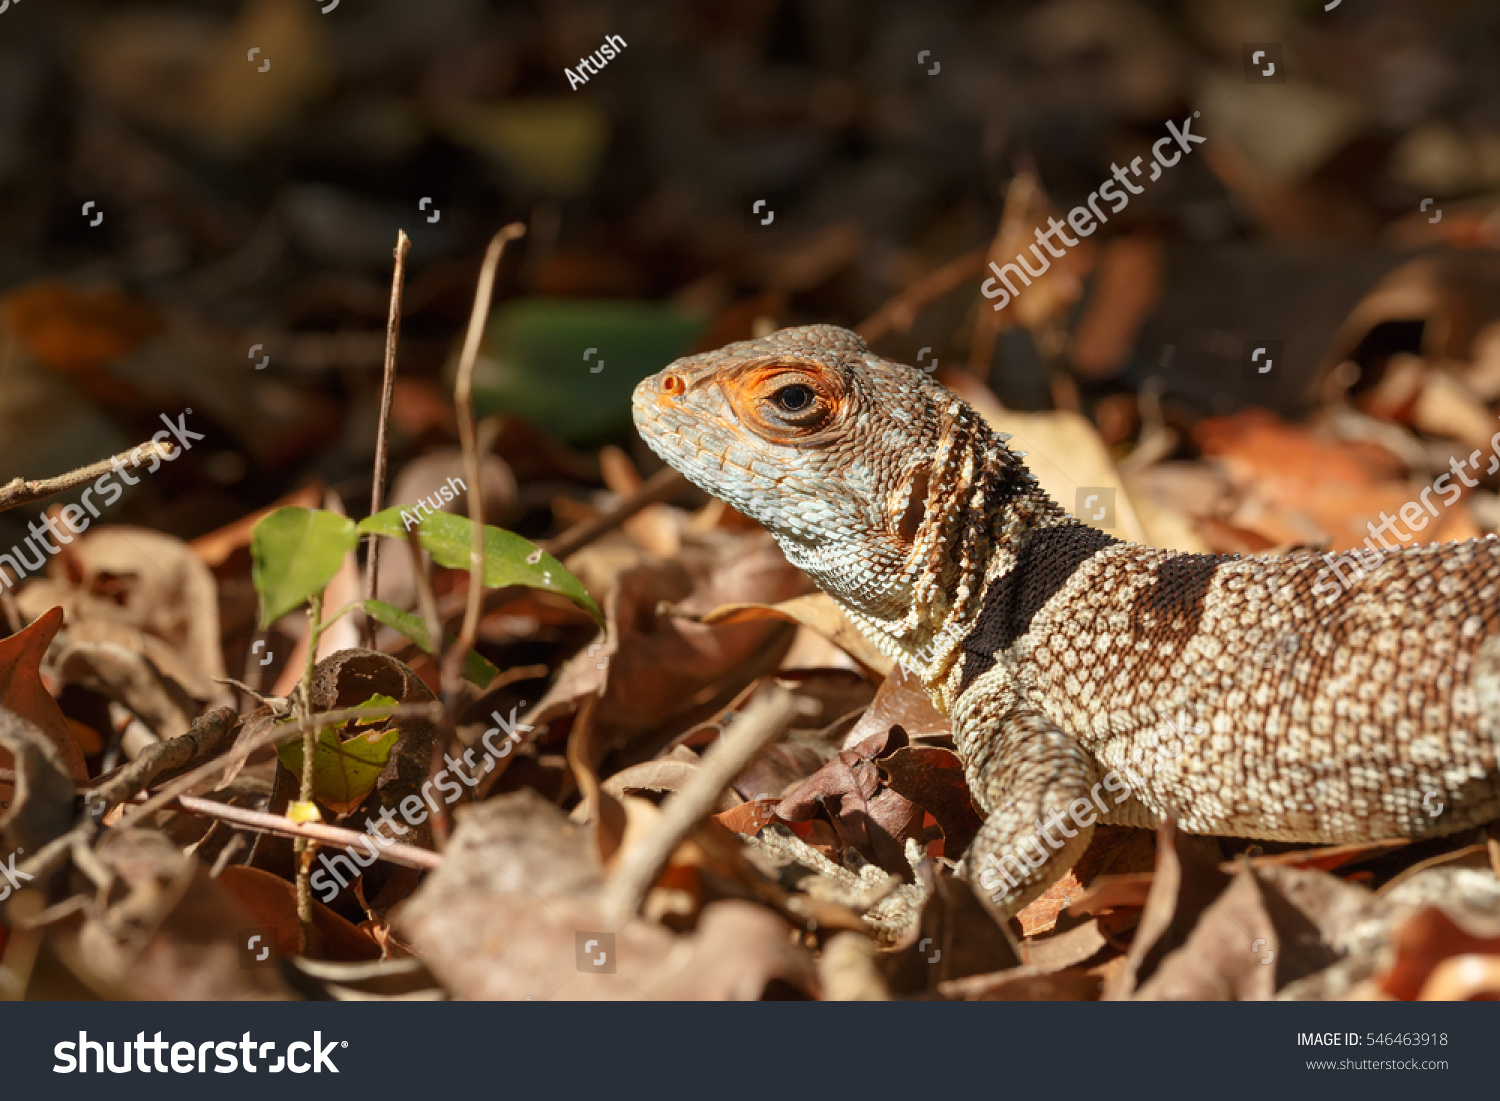 Oplurus cuvieri, commonly known as the collared iguanid lizard, collared iguana, or Madagascan collared iguana. Ankarafantsika National Park, Madagascar wildlife and wilderness #546463918